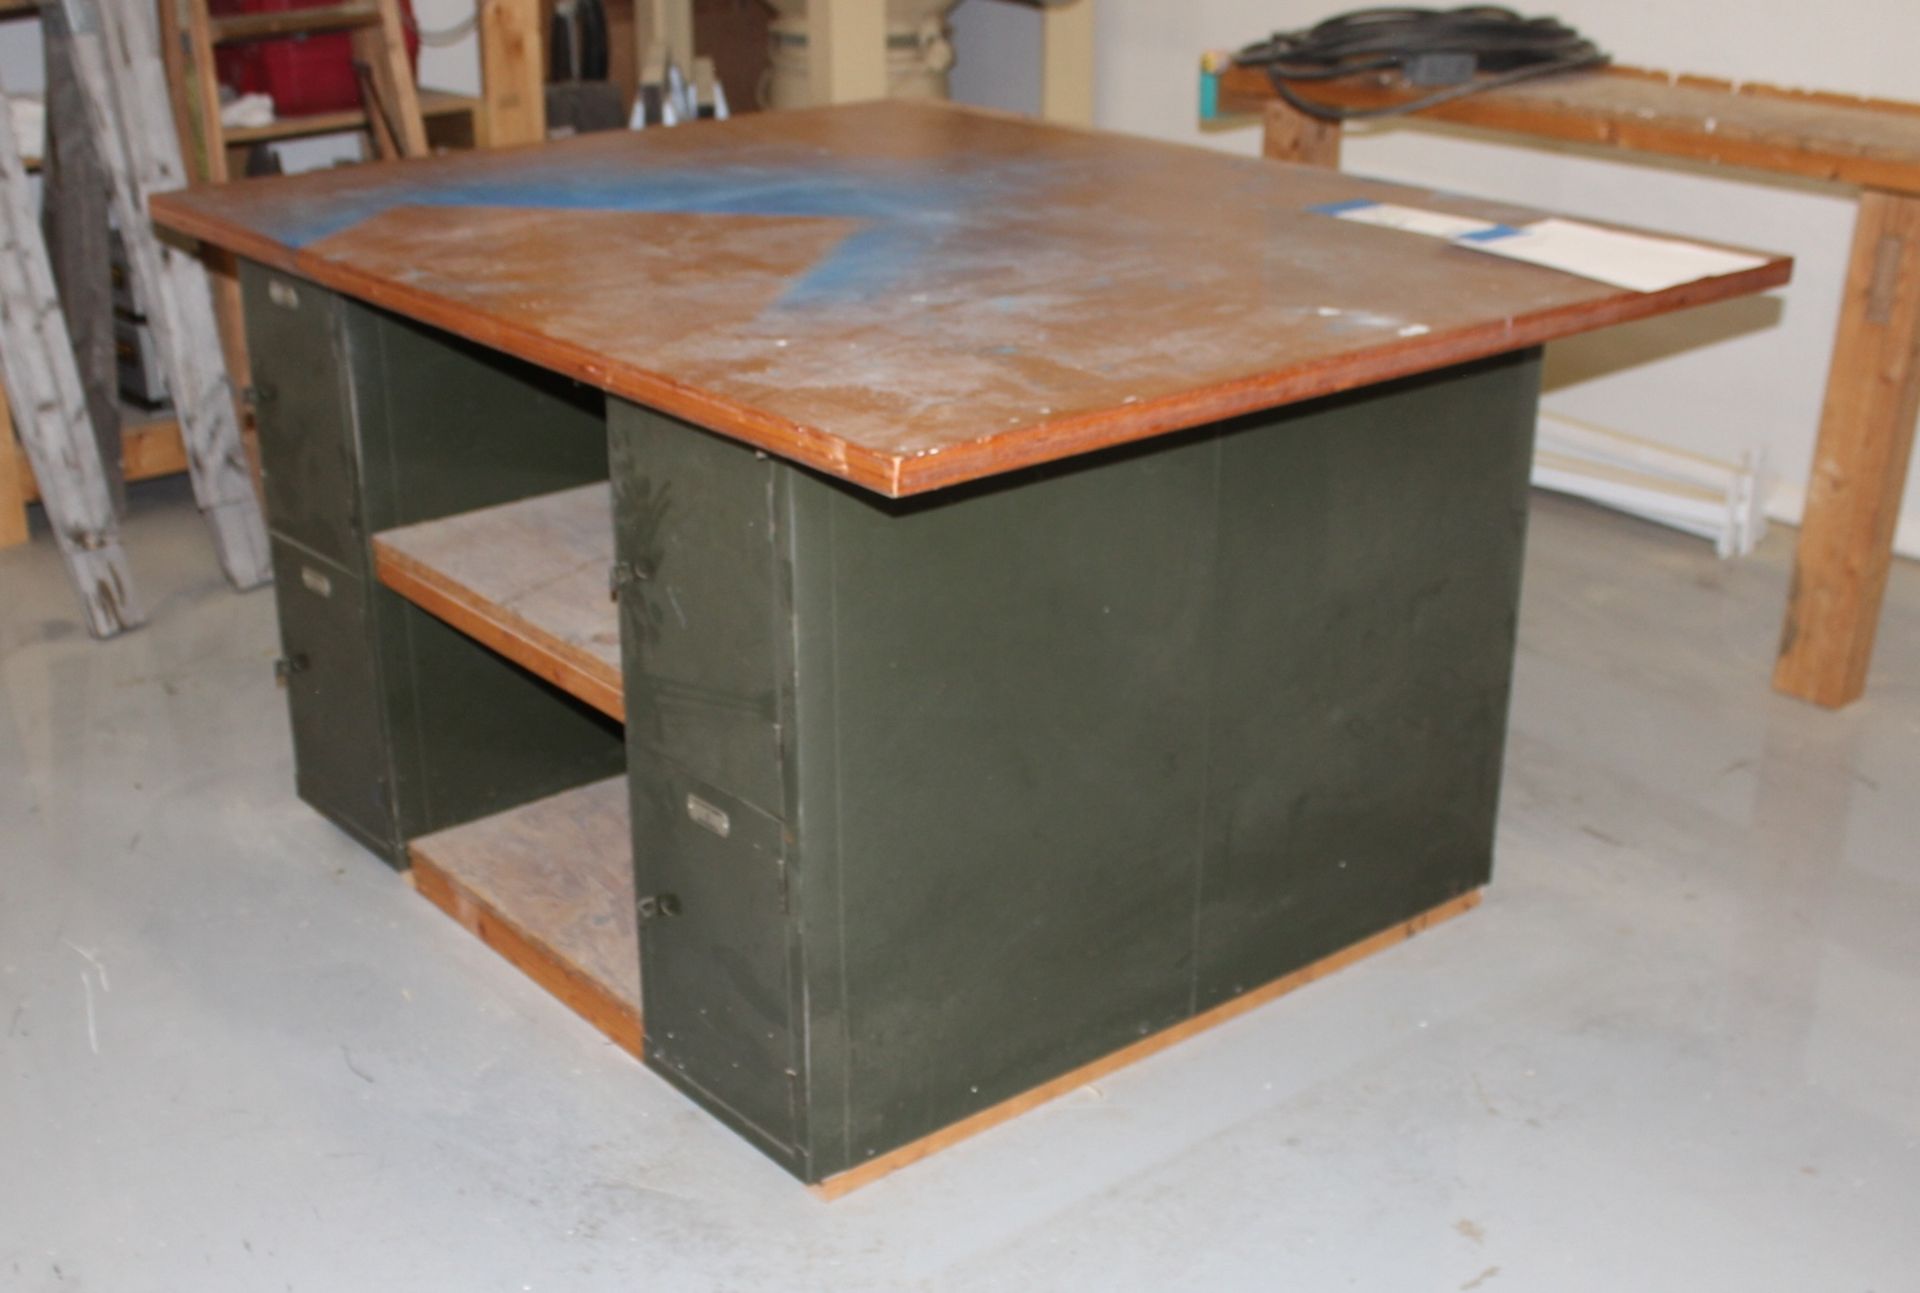 Woodworking bench with Lockers - Image 2 of 5